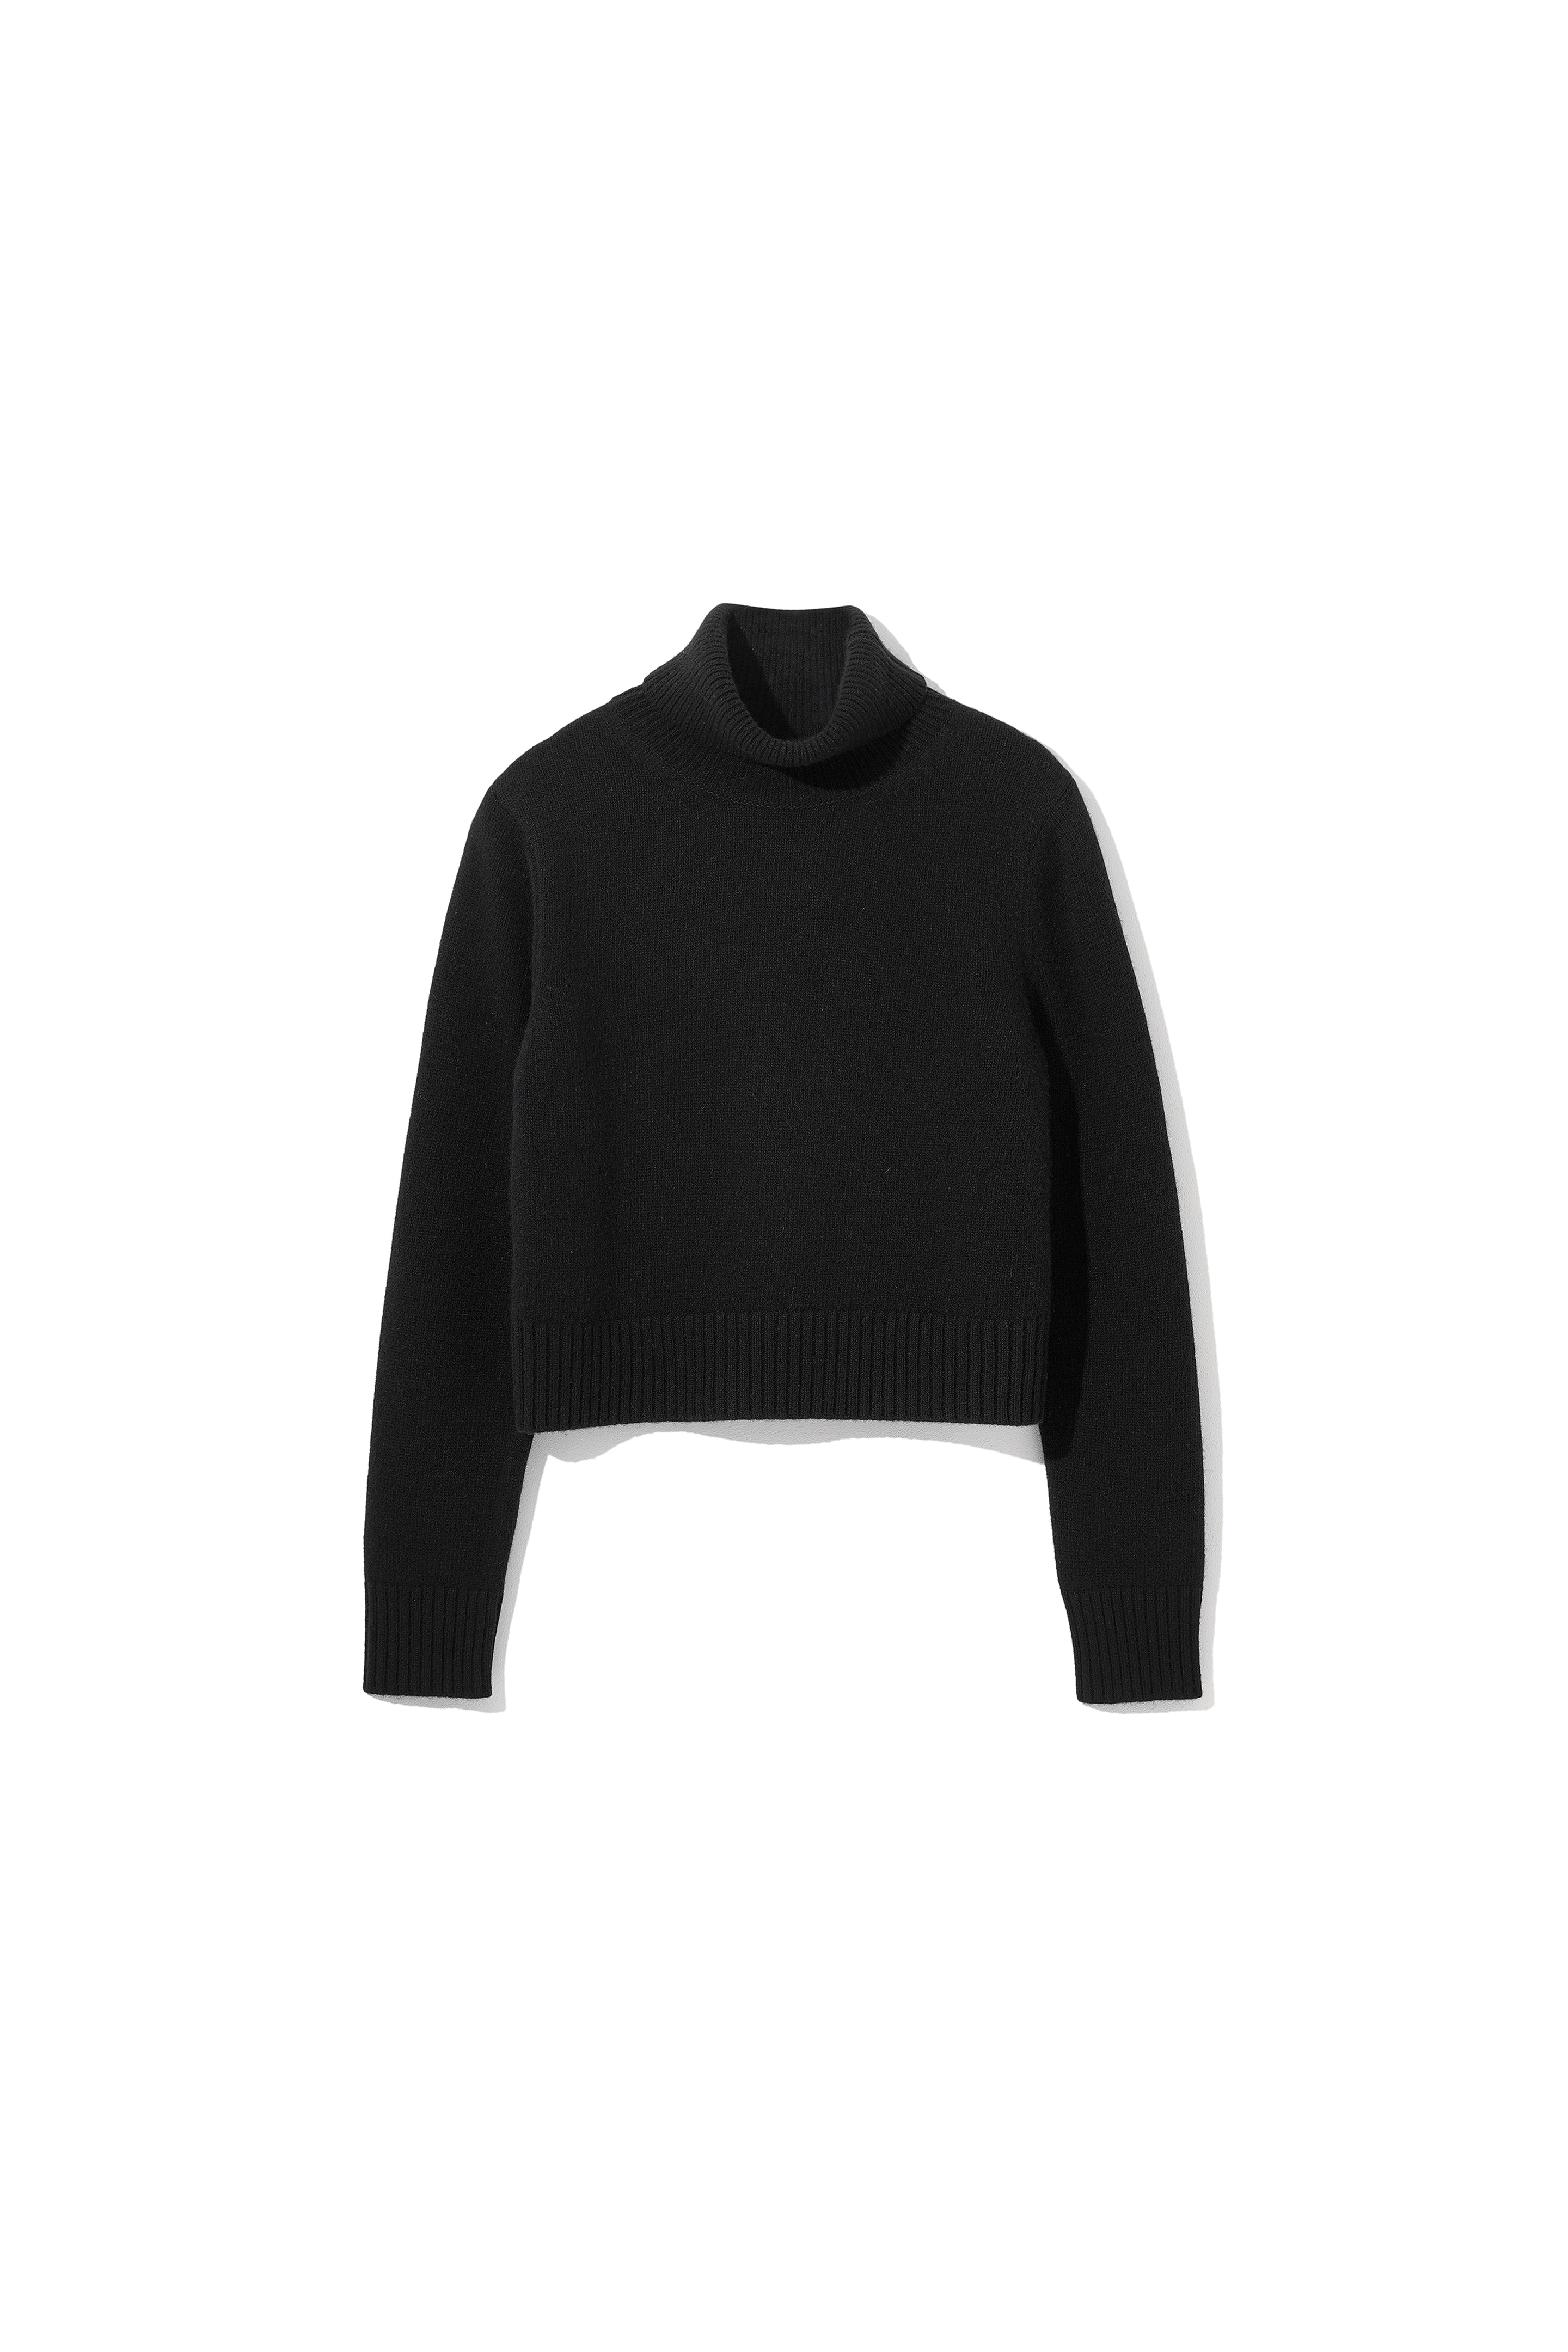 2nd) Cropped Turtle-Neck P/O Black